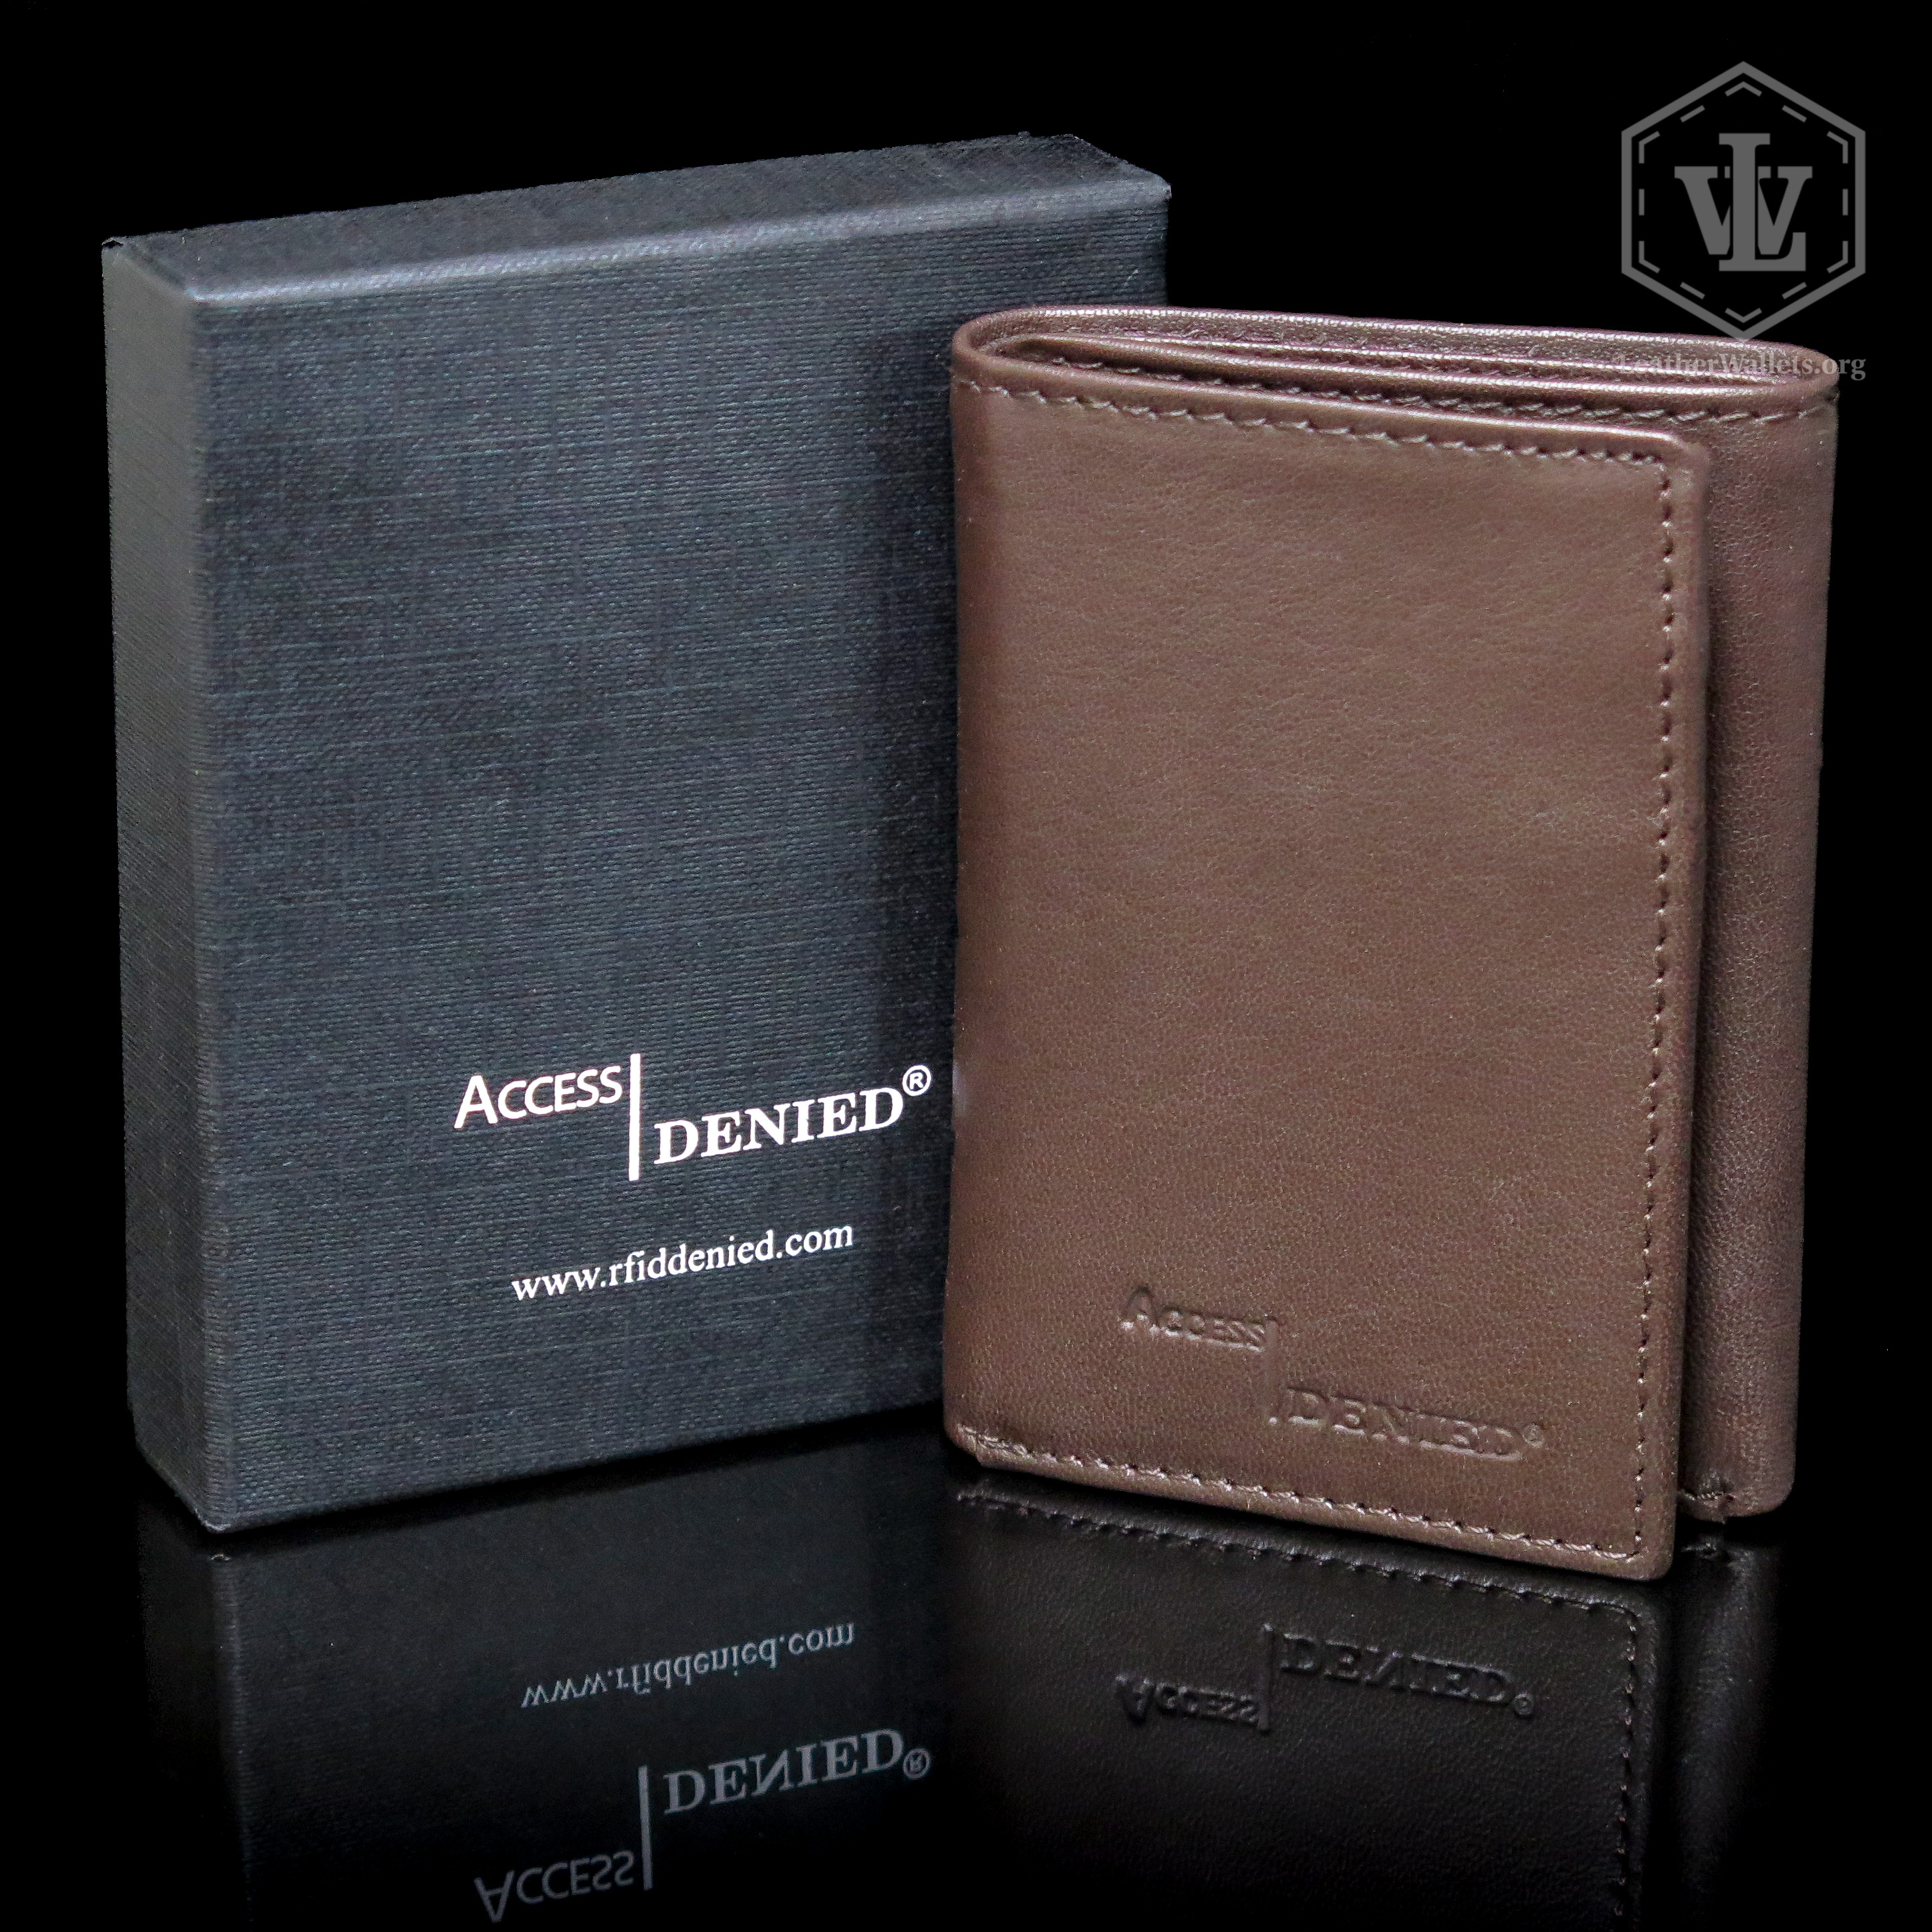 Access Denied Men's Trifold Leather Wallet